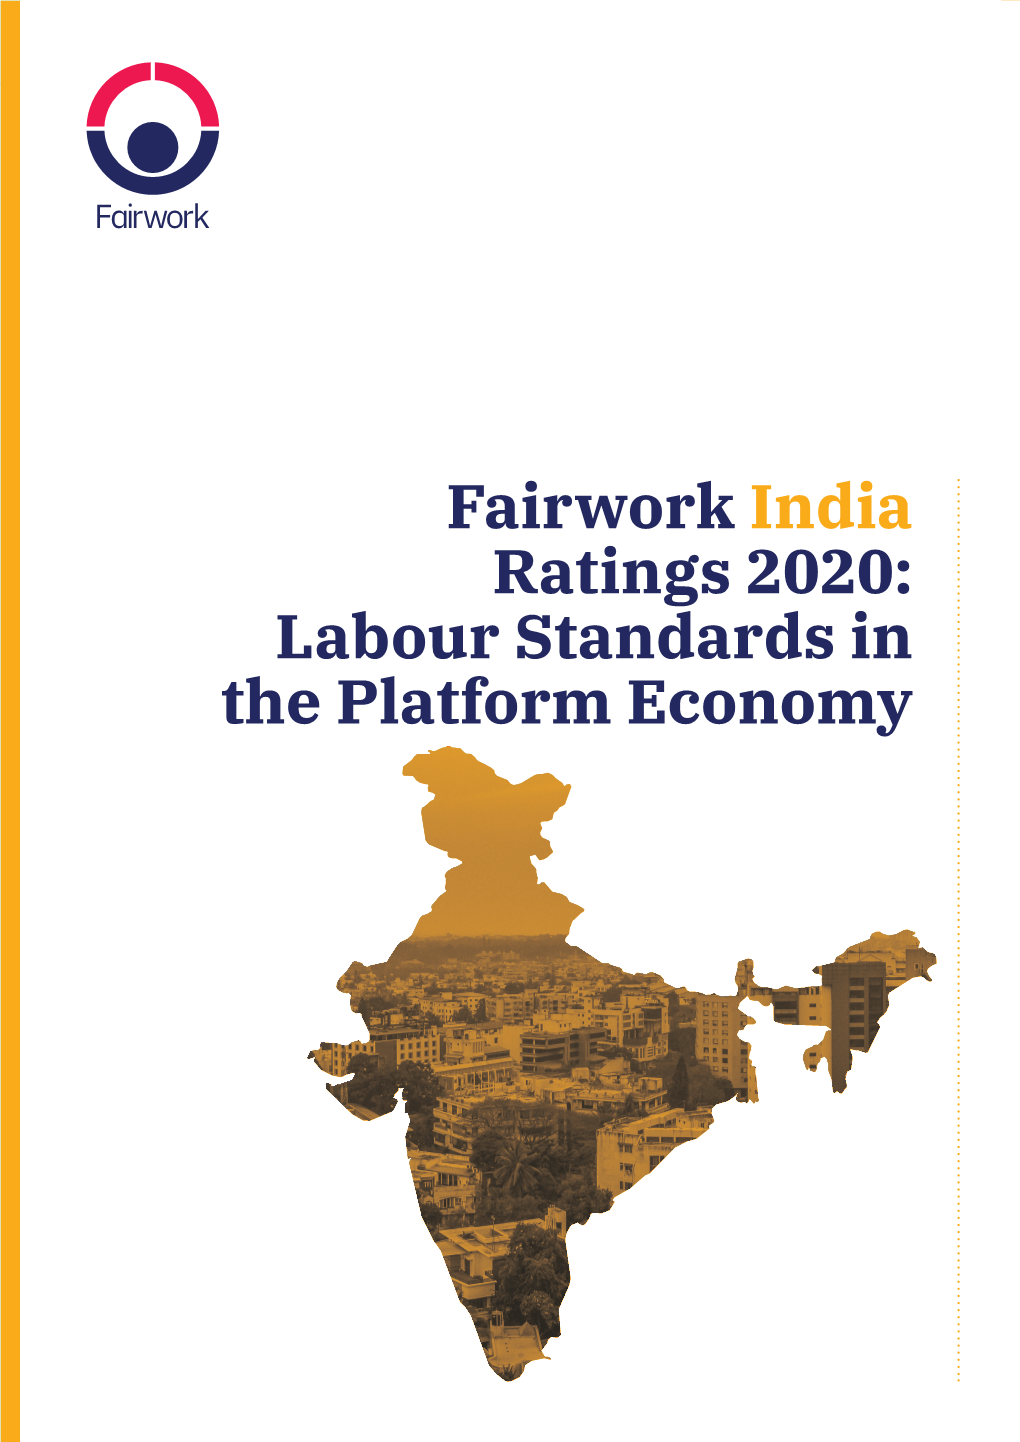 Fairwork India Ratings 2020: Labour Standards in the Platform Economy 2 | Fairwork India Ratings 2020